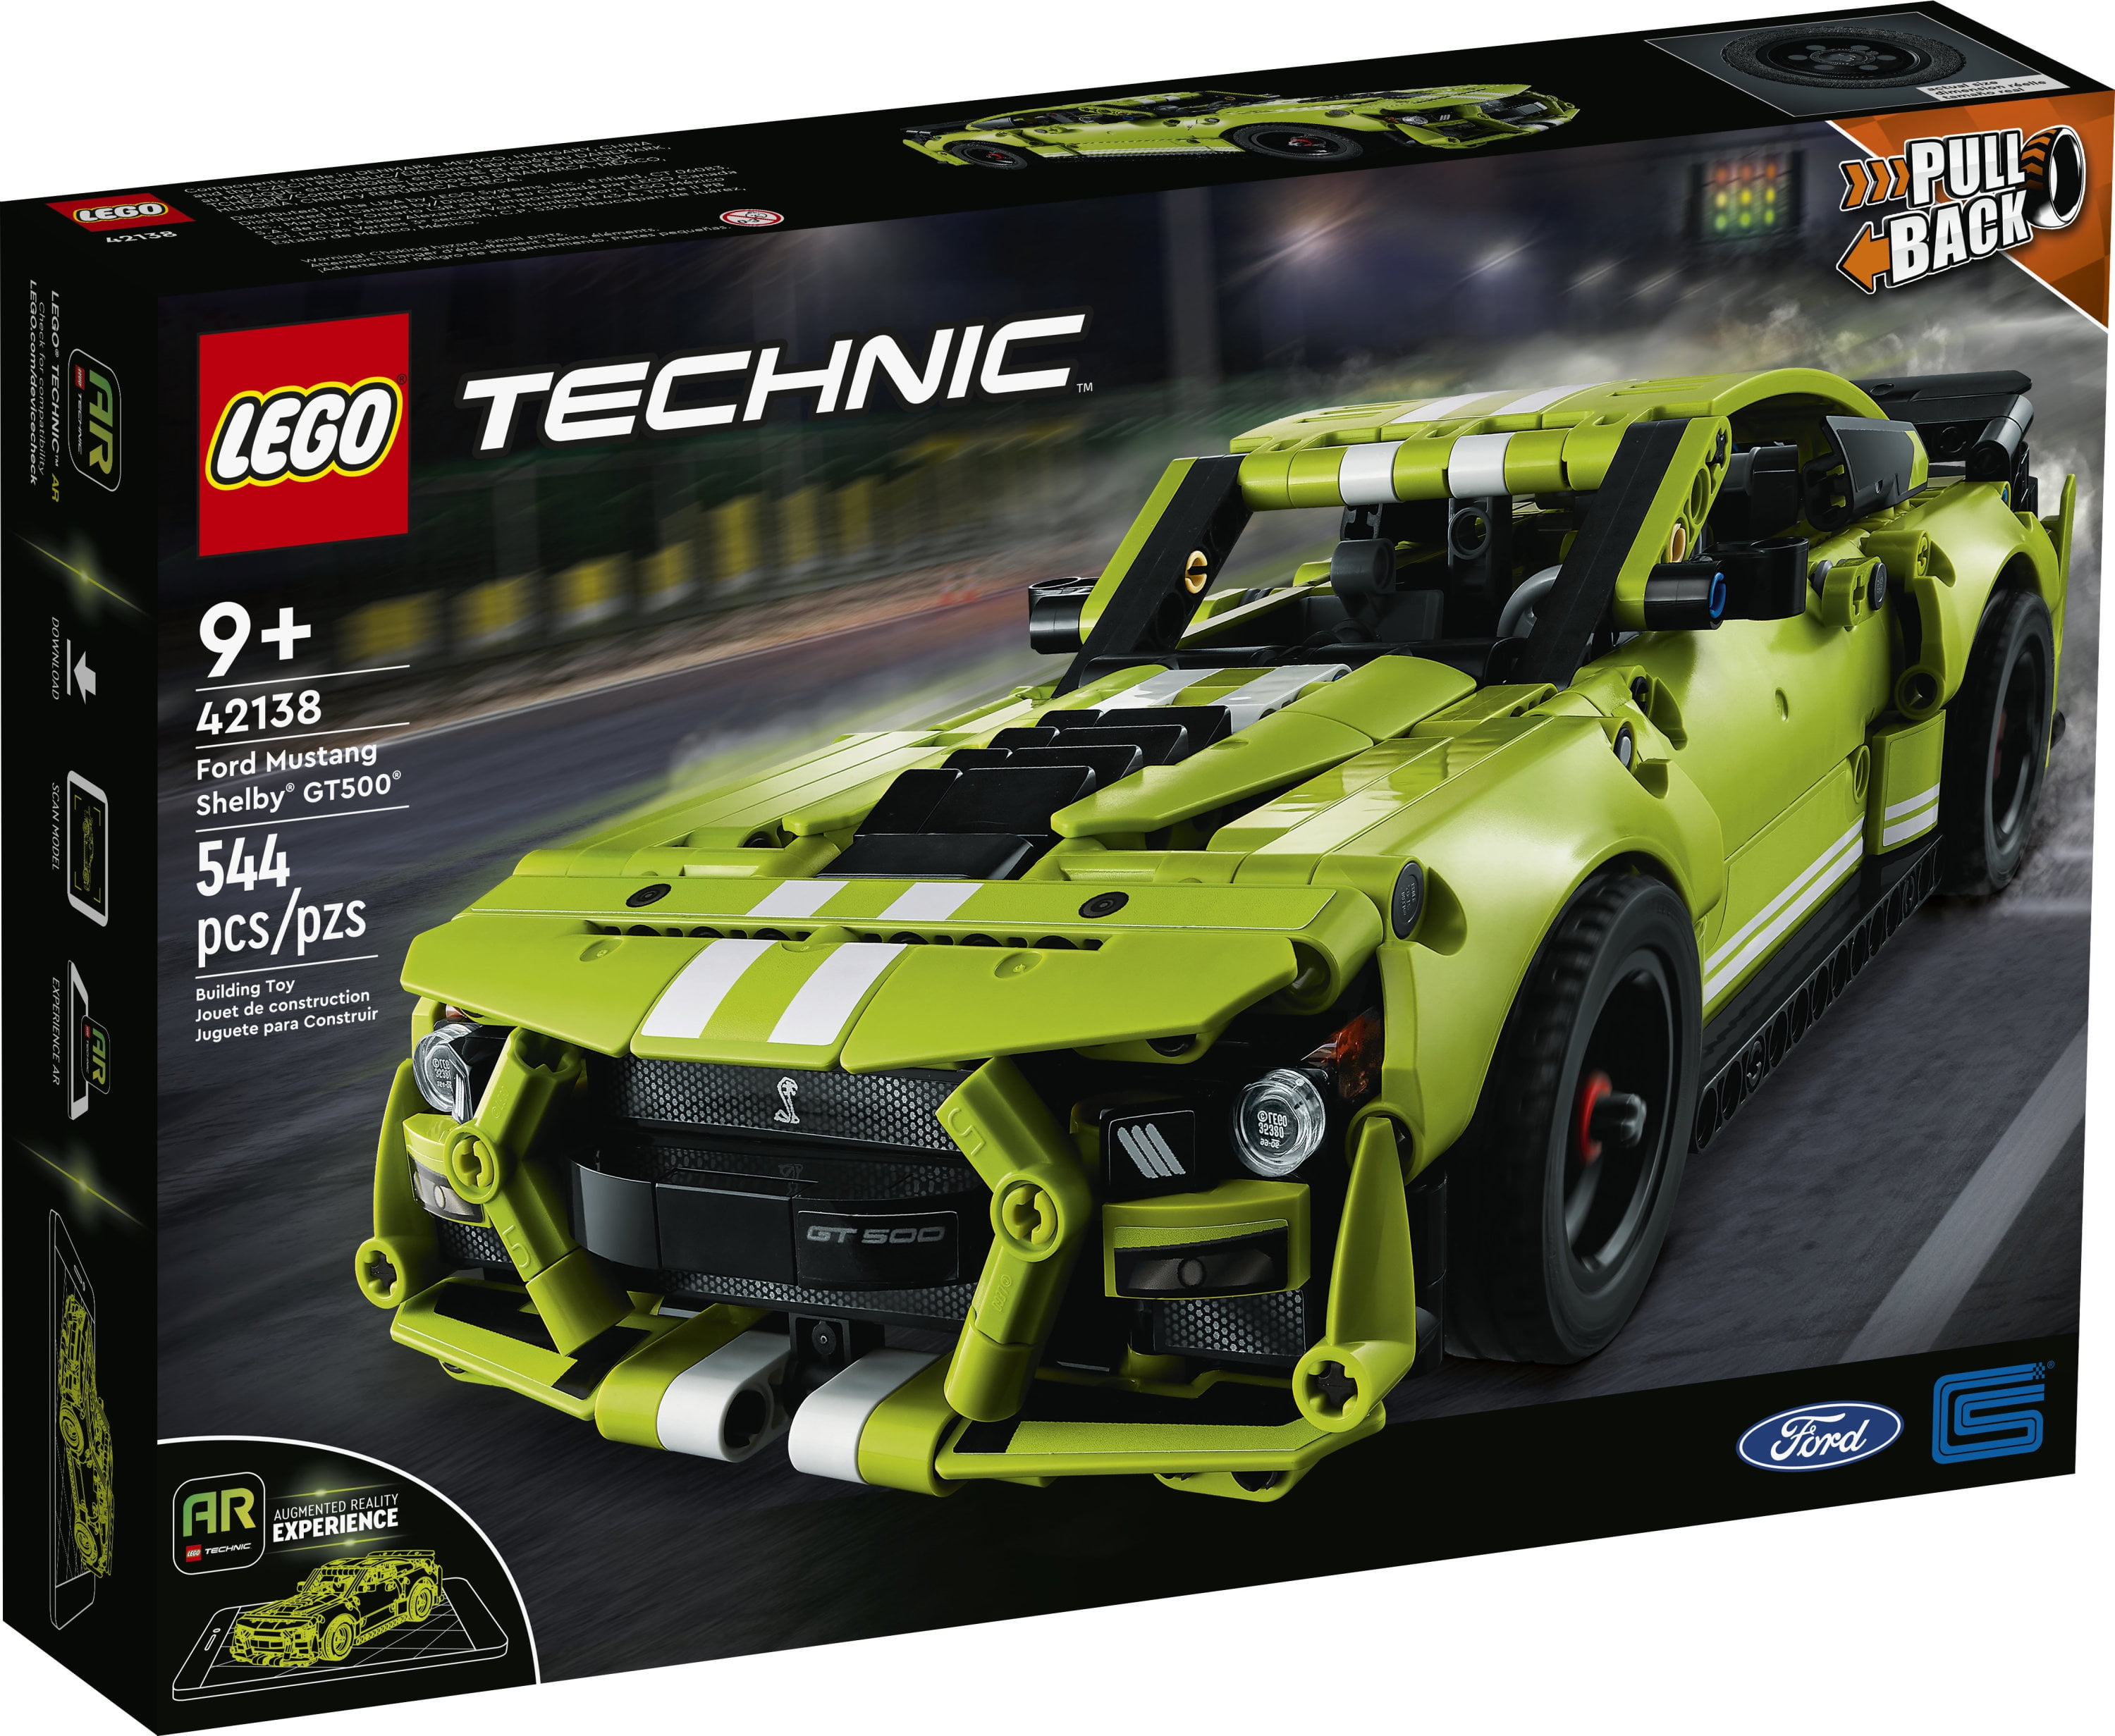 LEGO Technic Ford Mustang Shelby GT500 Building Set 42138 - Pull Back Drag  Race Toy Car Model Kit, Featuring AR App for Fast Action Play, Great Gift